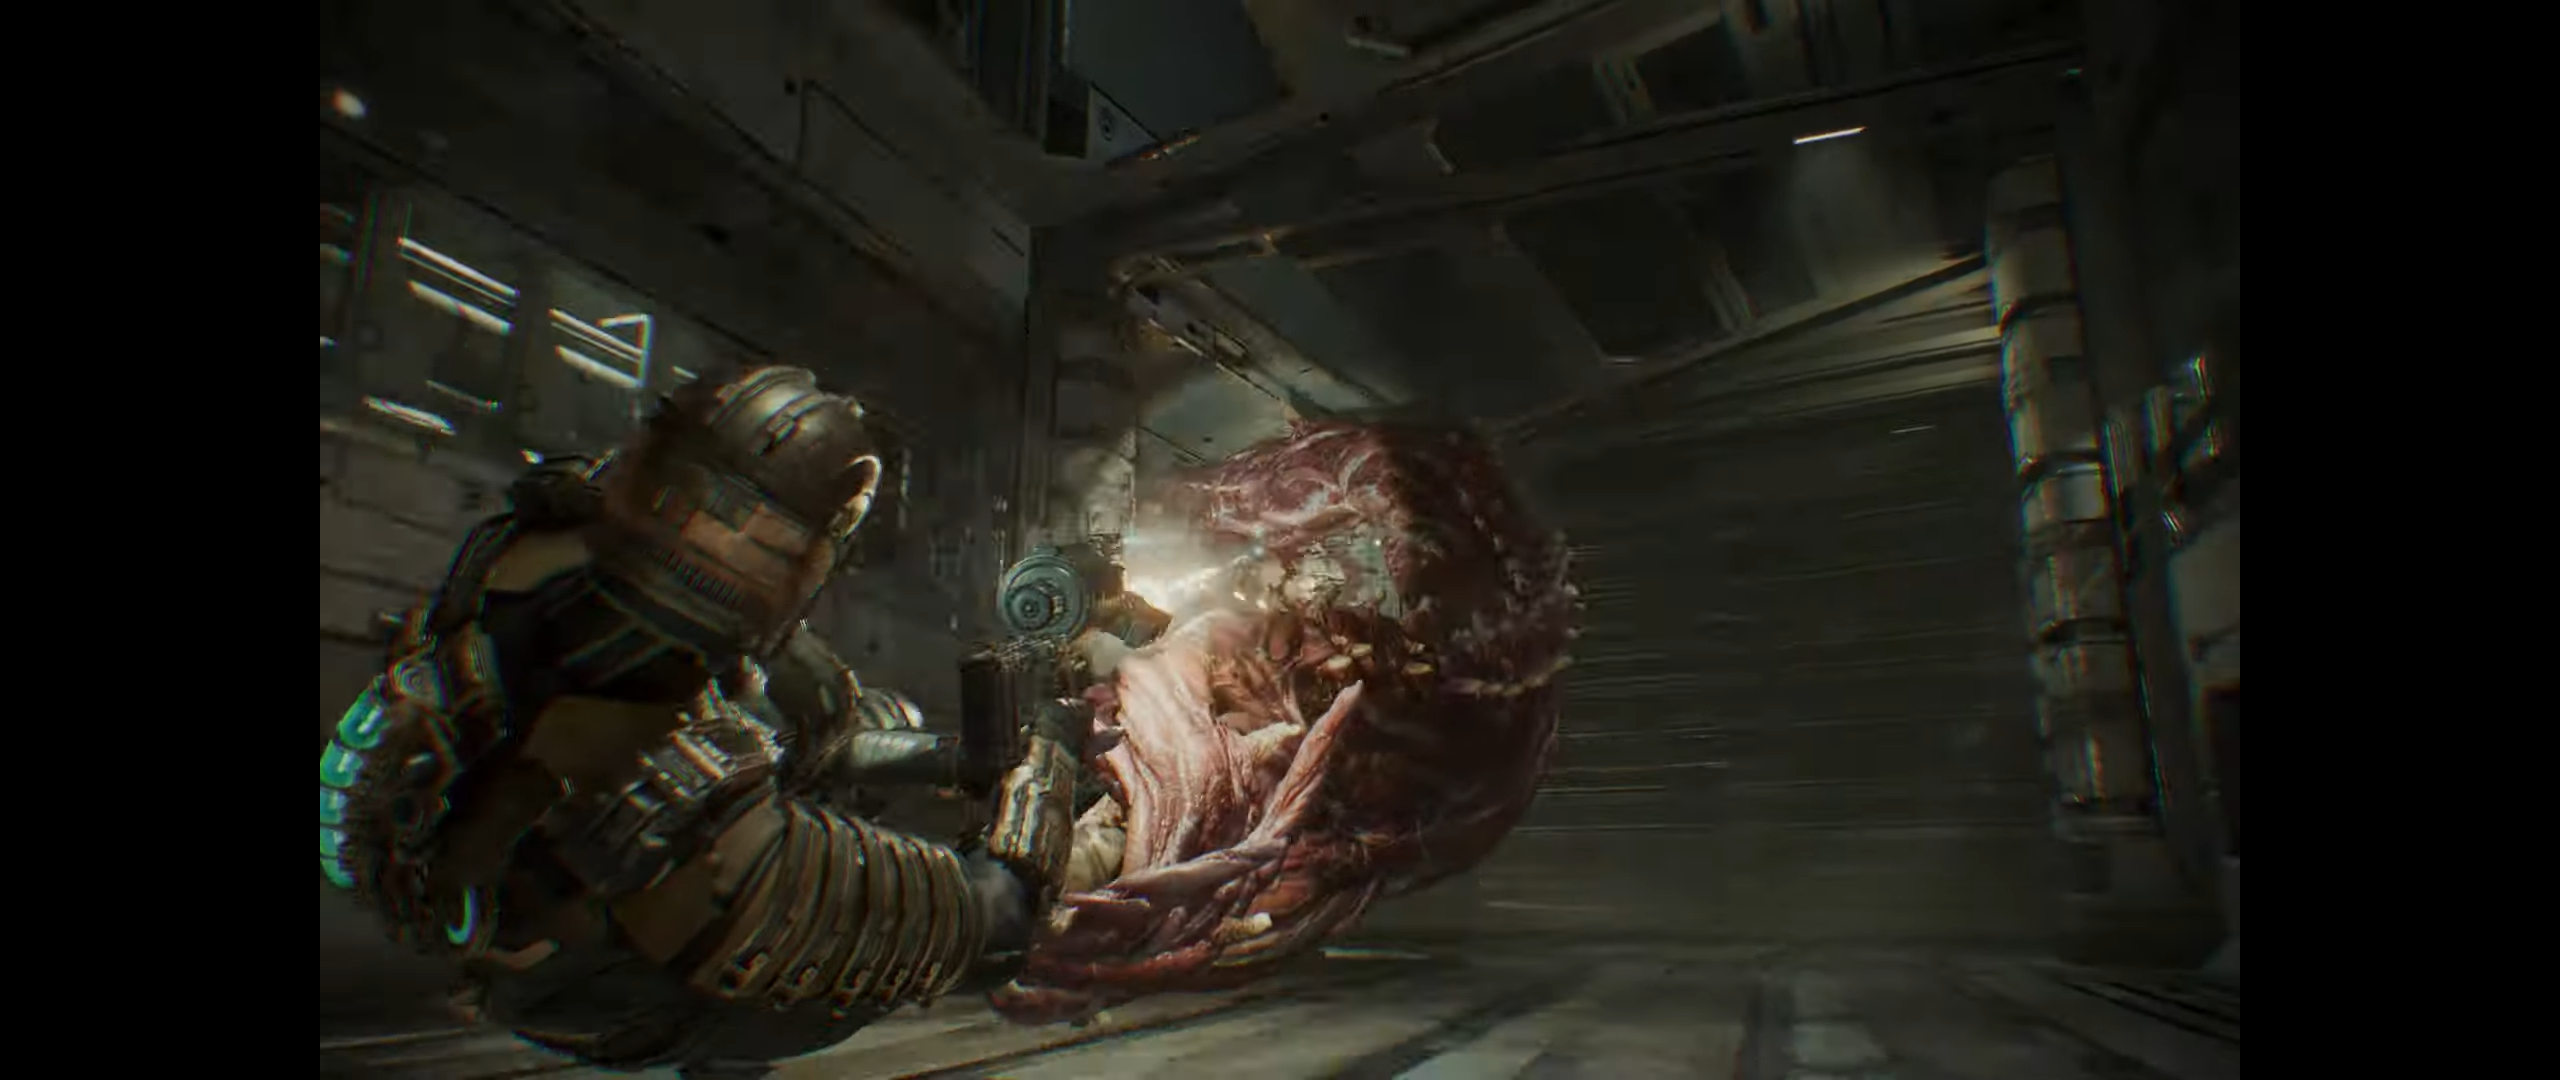 Dead Space remake gameplay shown off in all its gory glory -   News